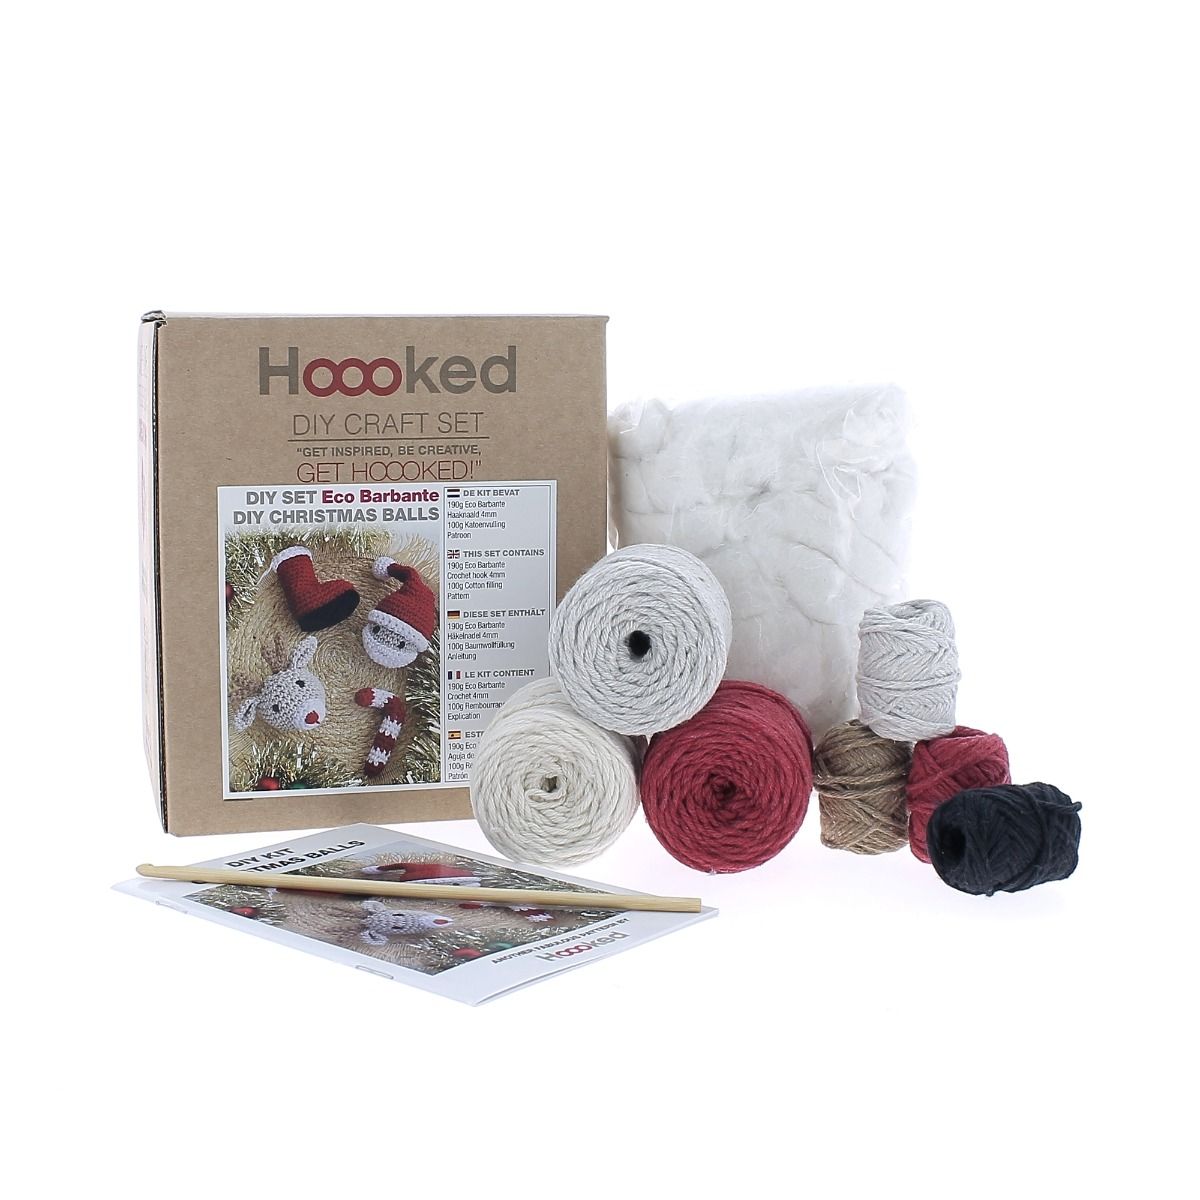 Hoooked Crochet Kit - Christmas Ornaments -Crafter's Companion US